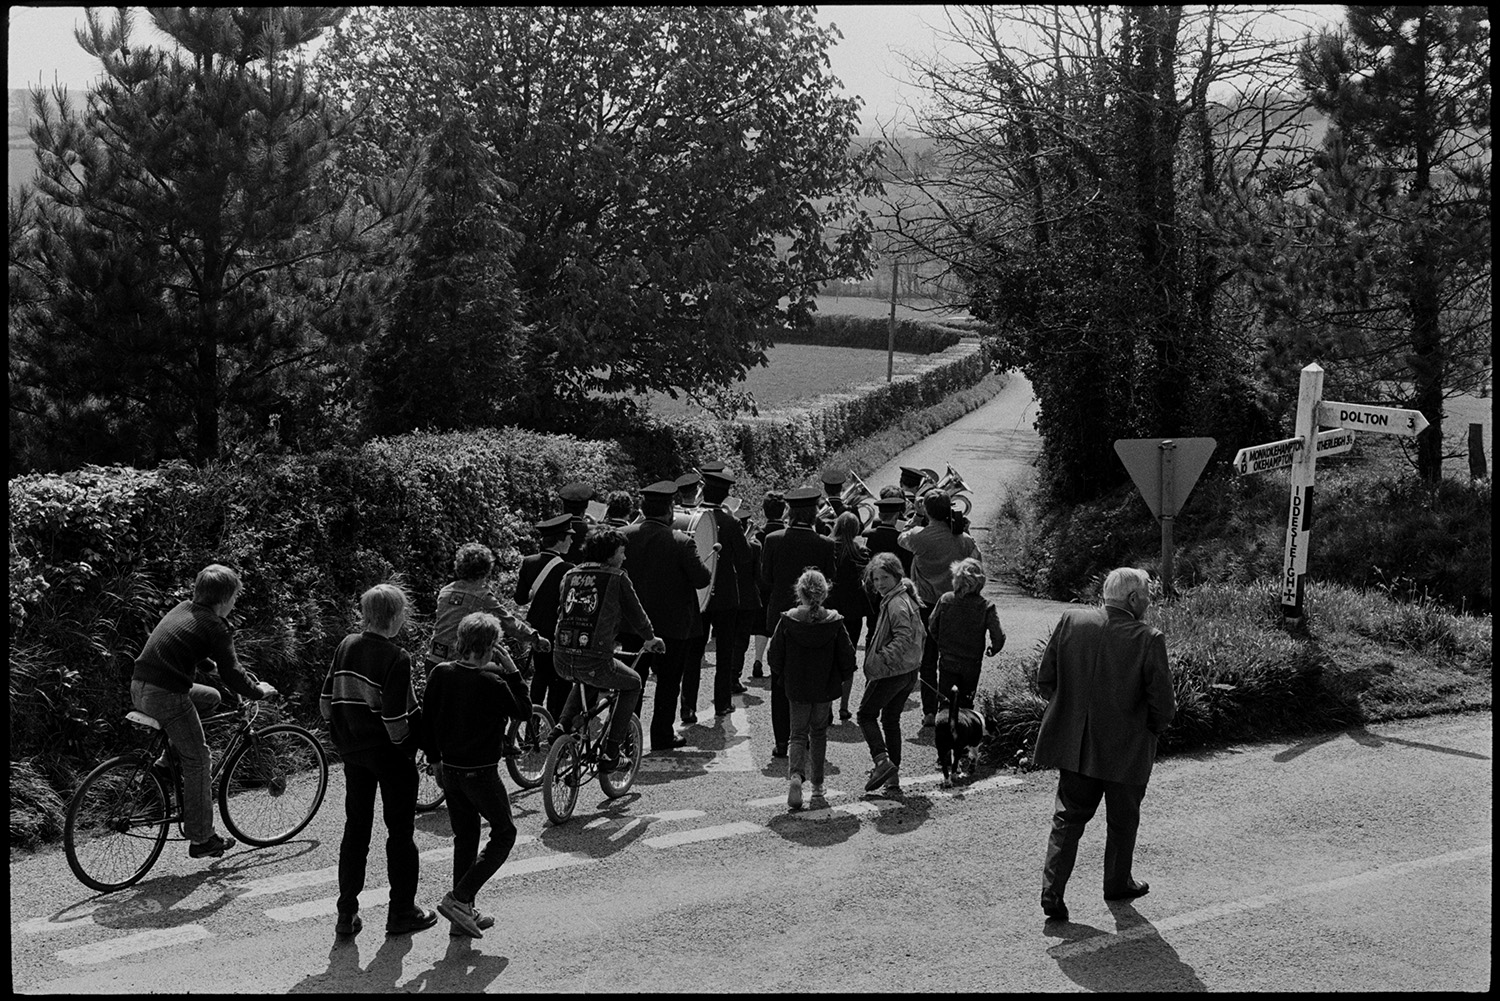 Club Day procession. Band and villagers marching to sports field.
[People, including children and boys riding bicycles, following the Hatherleigh Silver Band down a road in the Iddesleigh Club day parade. A signpost is at the road junction.]